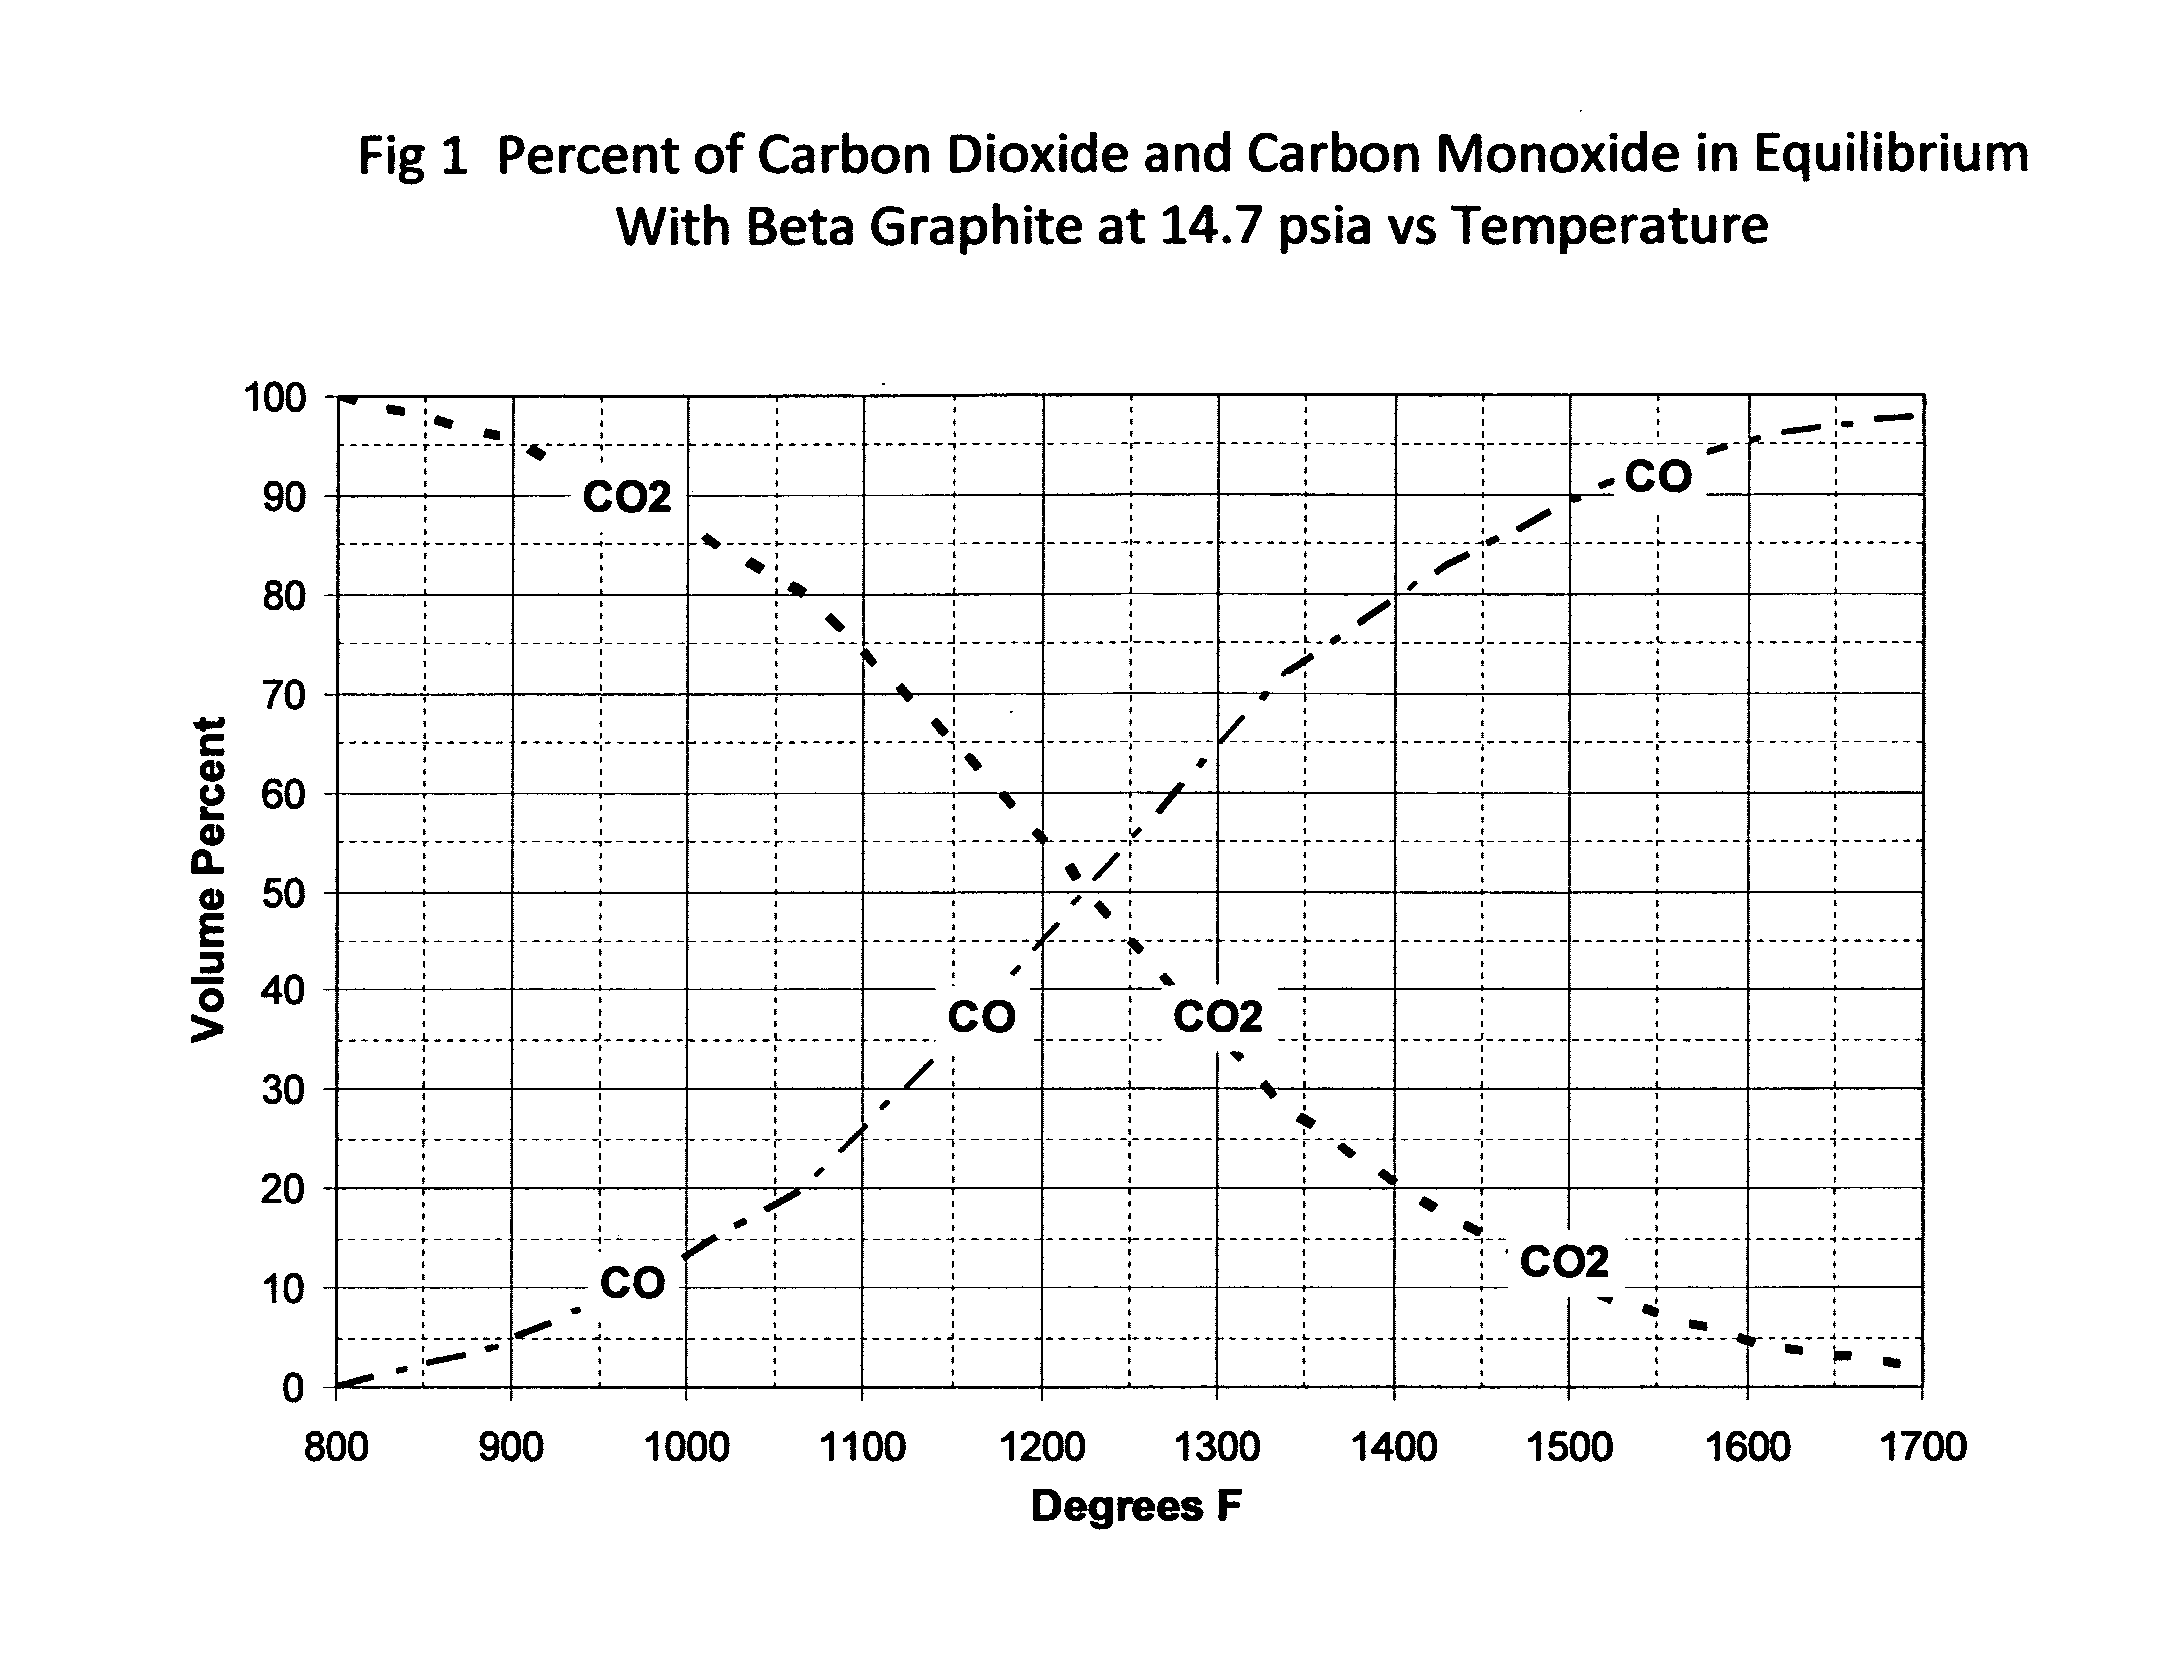 Method for reducing carbon dioxide emissions and water contamination potential while increasing product yields from carbon gasification and energy production processes